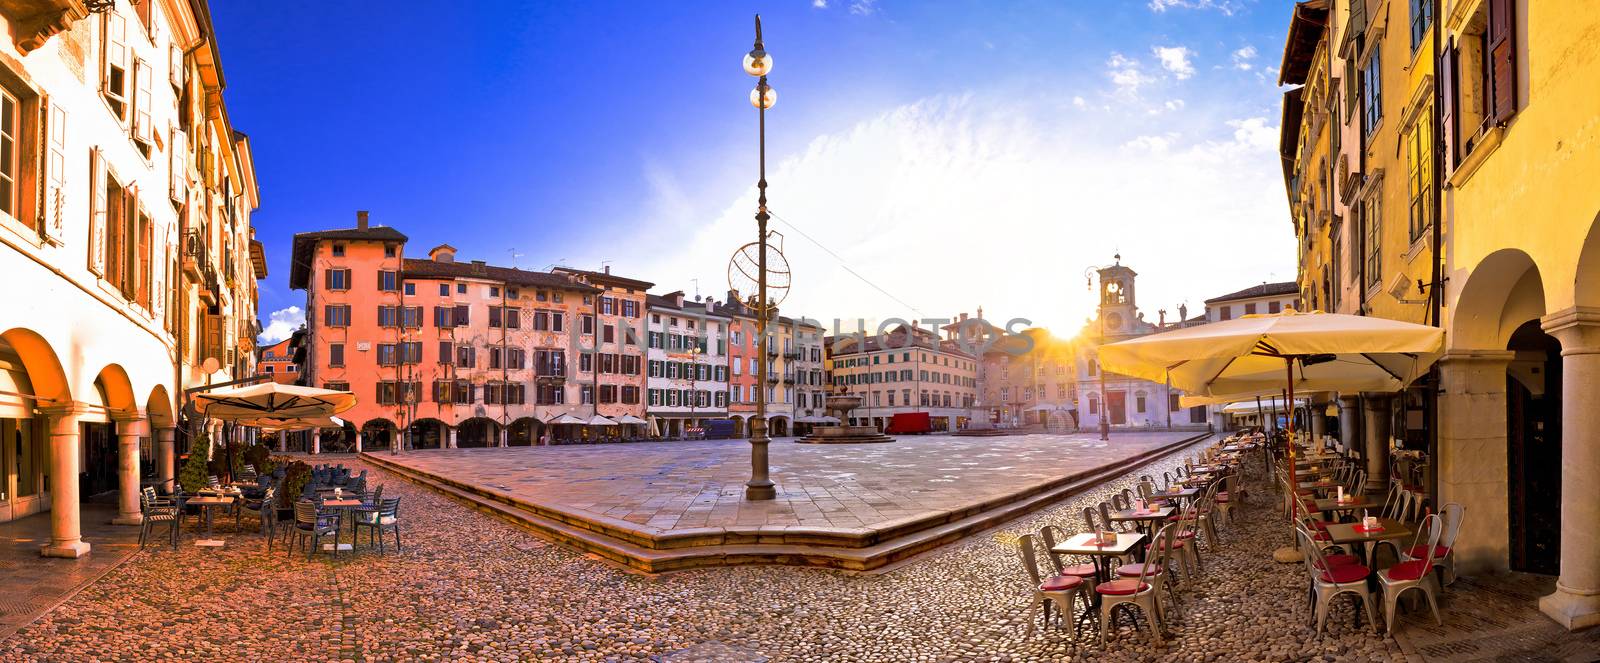 Piazza San Giacomo in Udine sunset panoramic view by xbrchx